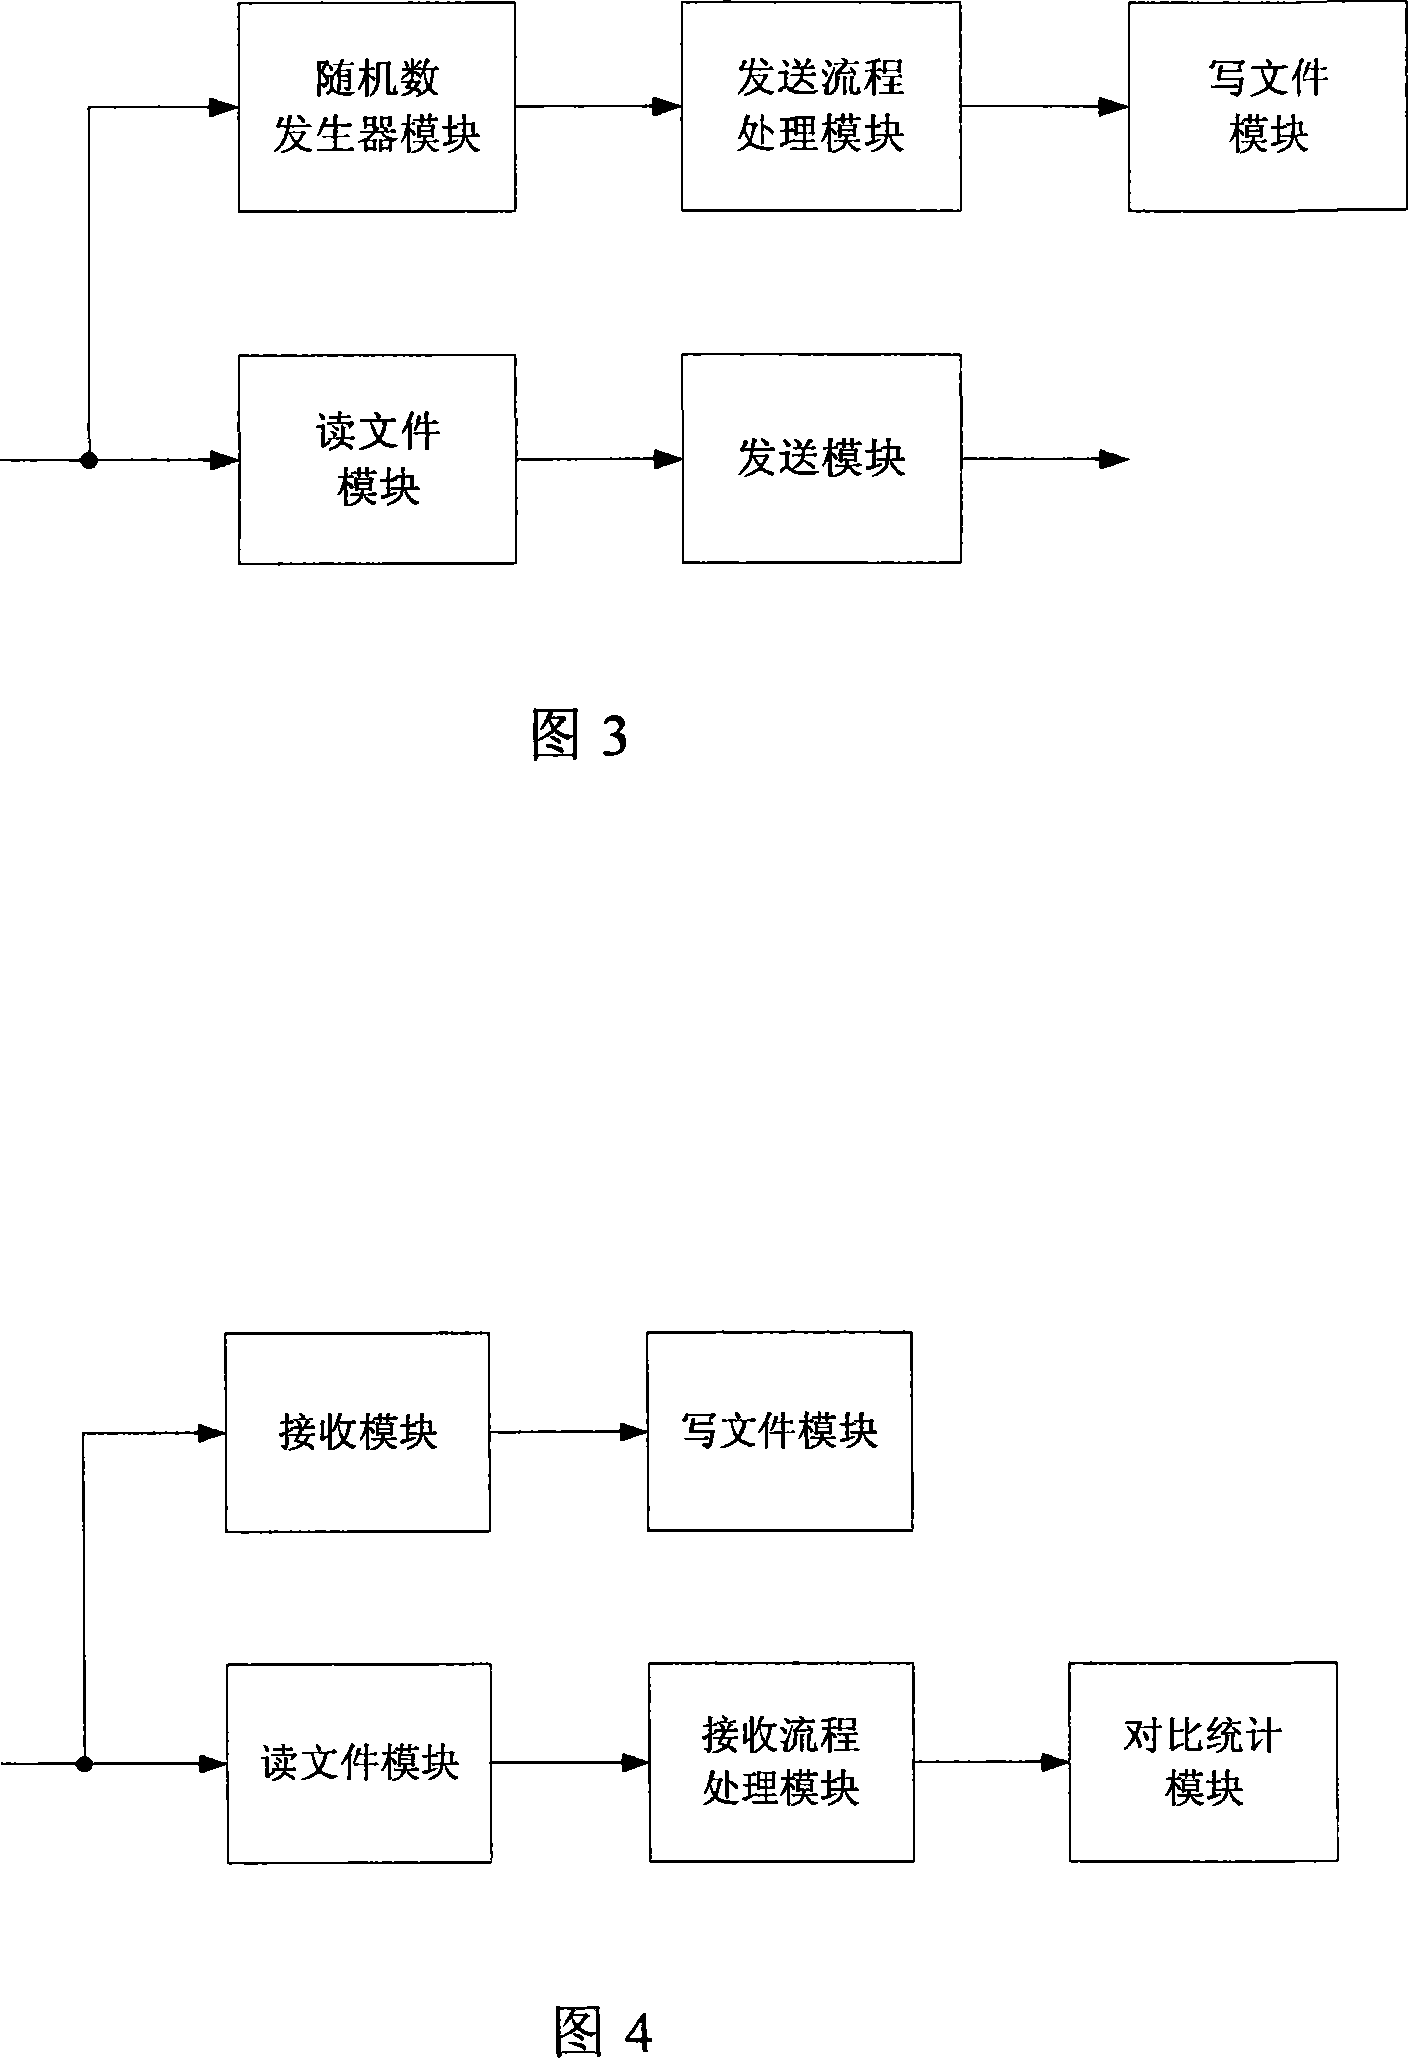 System and method for testing channel transmission performance with the practical channel and computer simulation